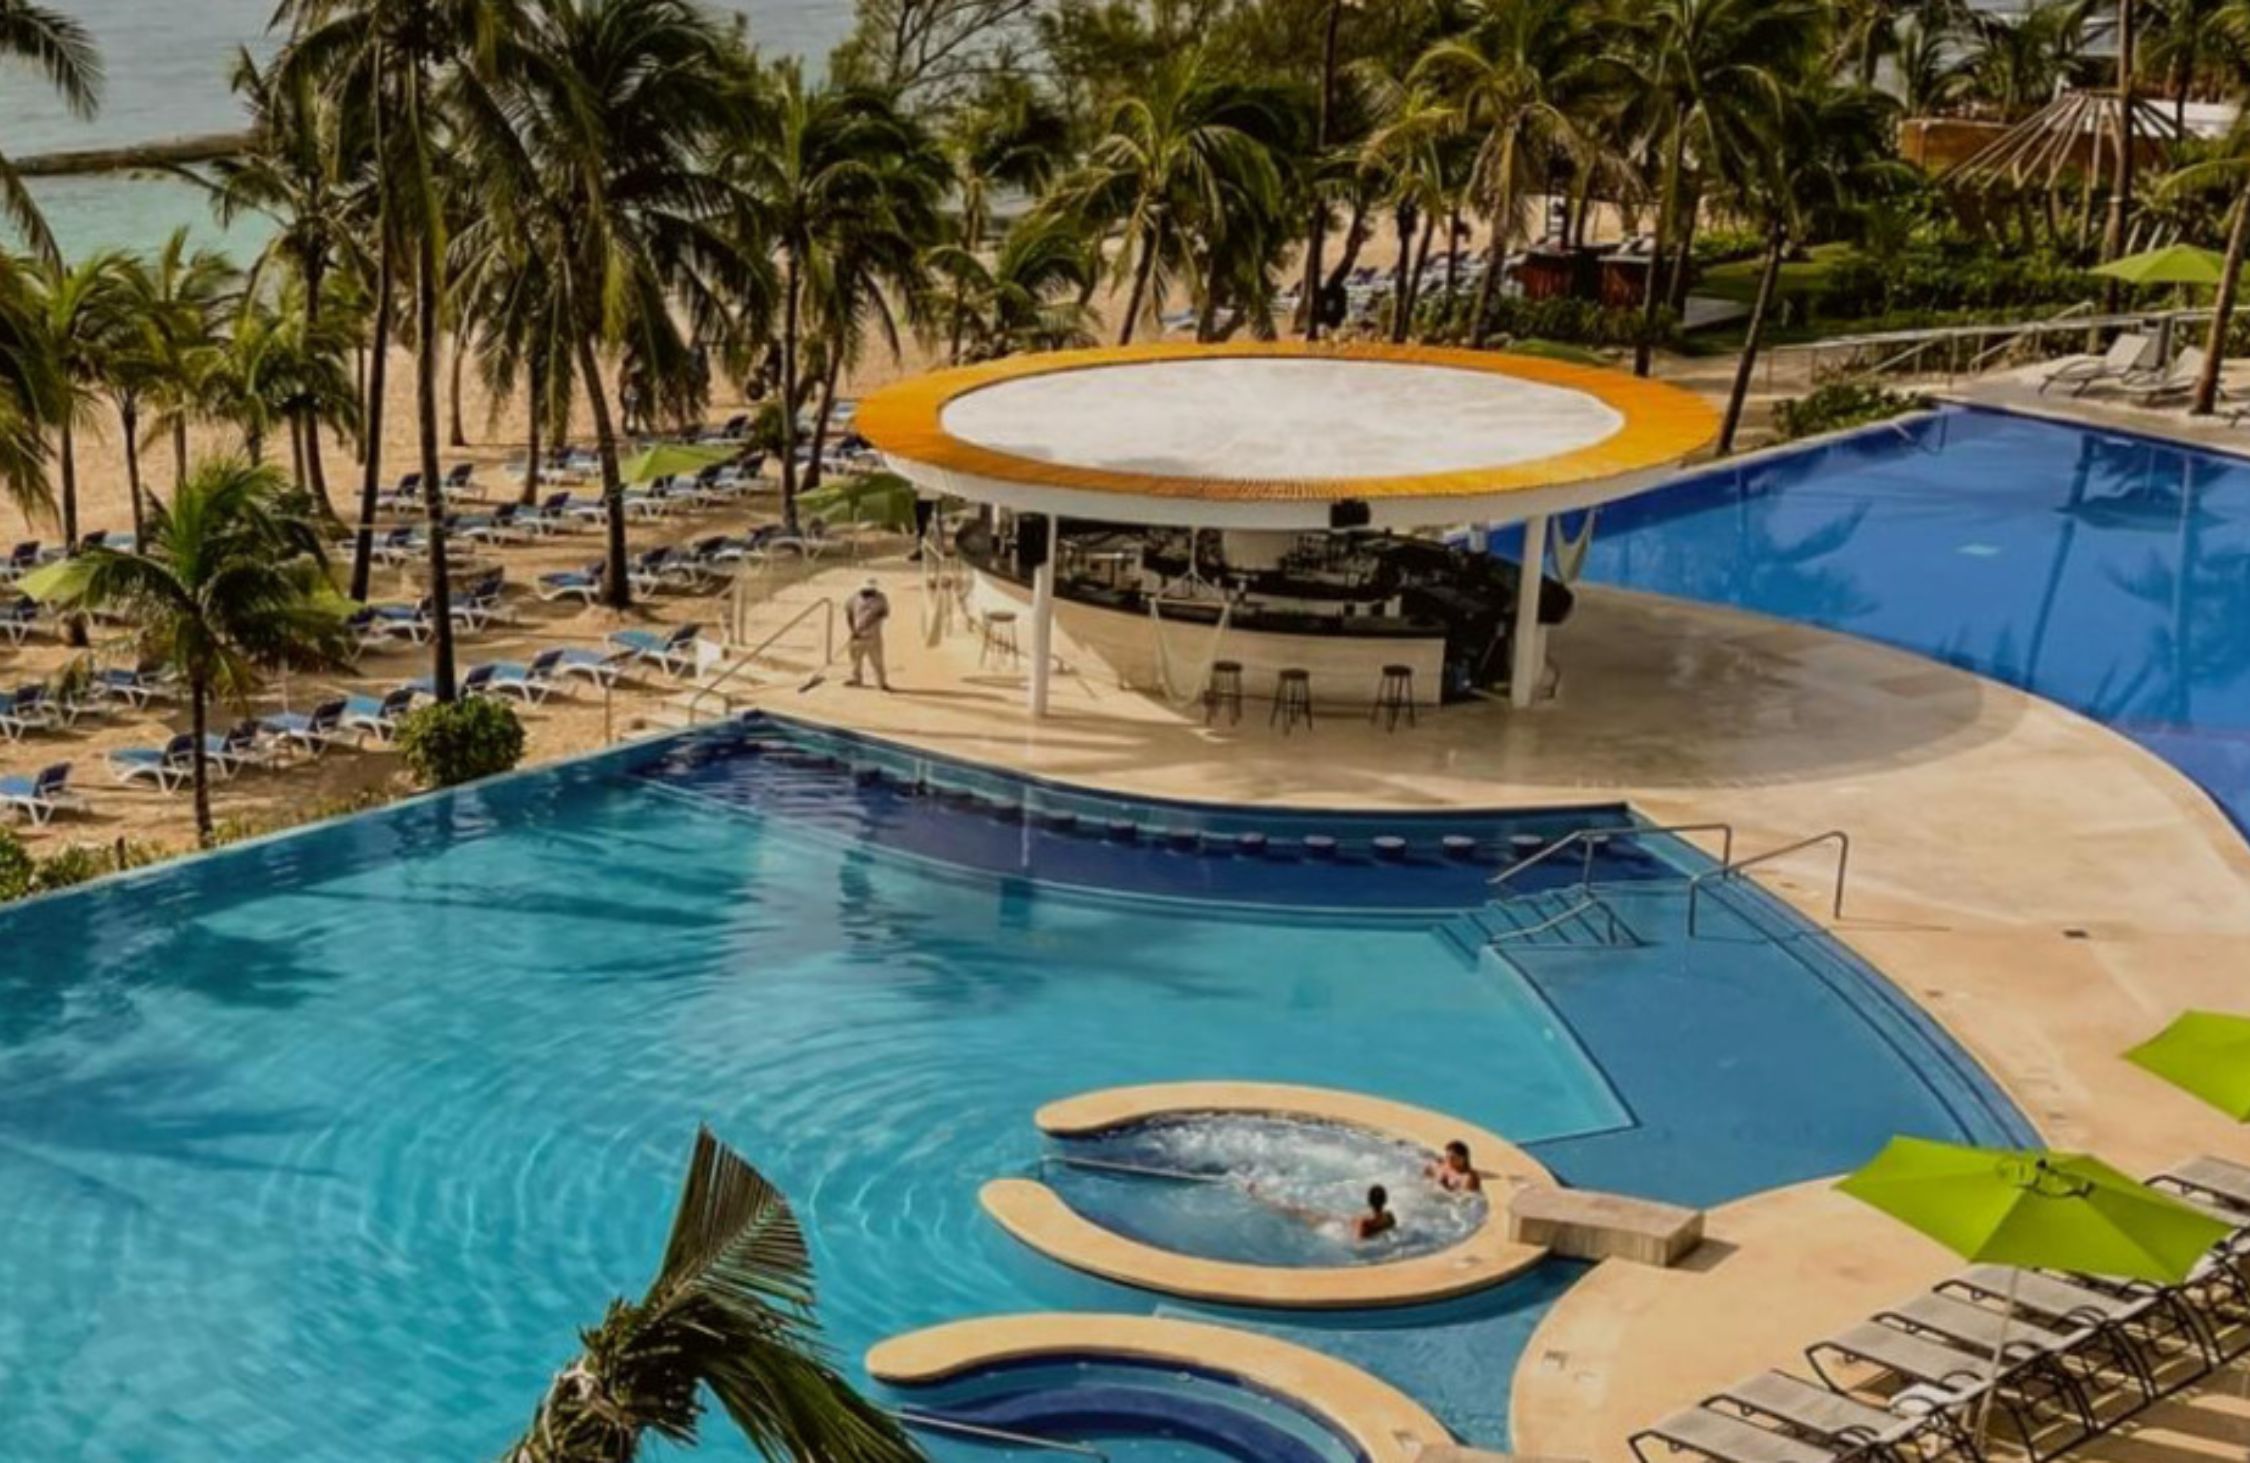 Luxury studio for sale in Playacar, 4 pools, playground for children, Pet zone, gym, clubhouse, restaurant, terrace bar, concierge and more,